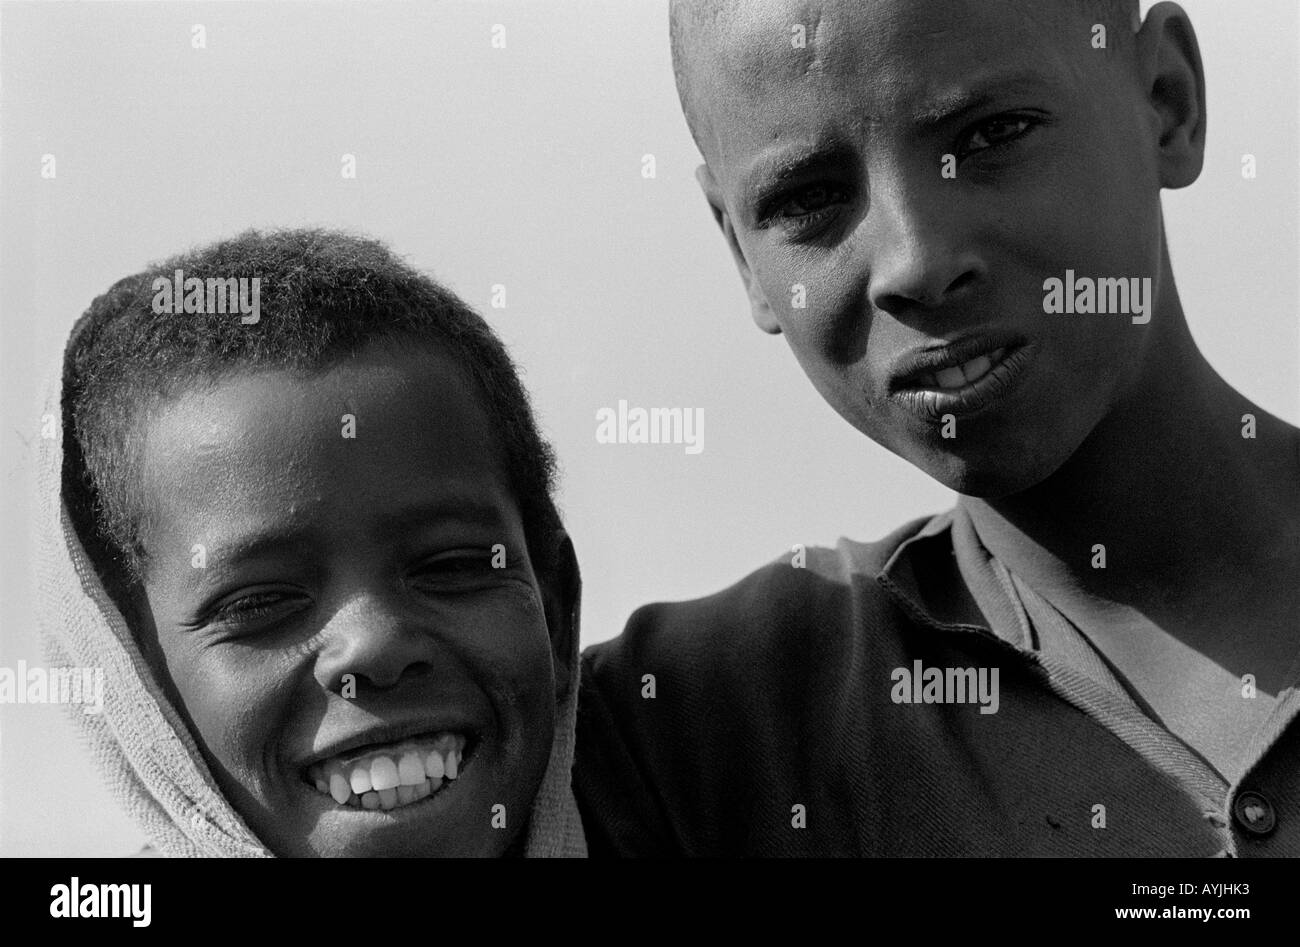 B/W portrait of two rural boys, one laughing, the other frowning. Mekoni, Tigray, Ethiopia, Africa Stock Photo